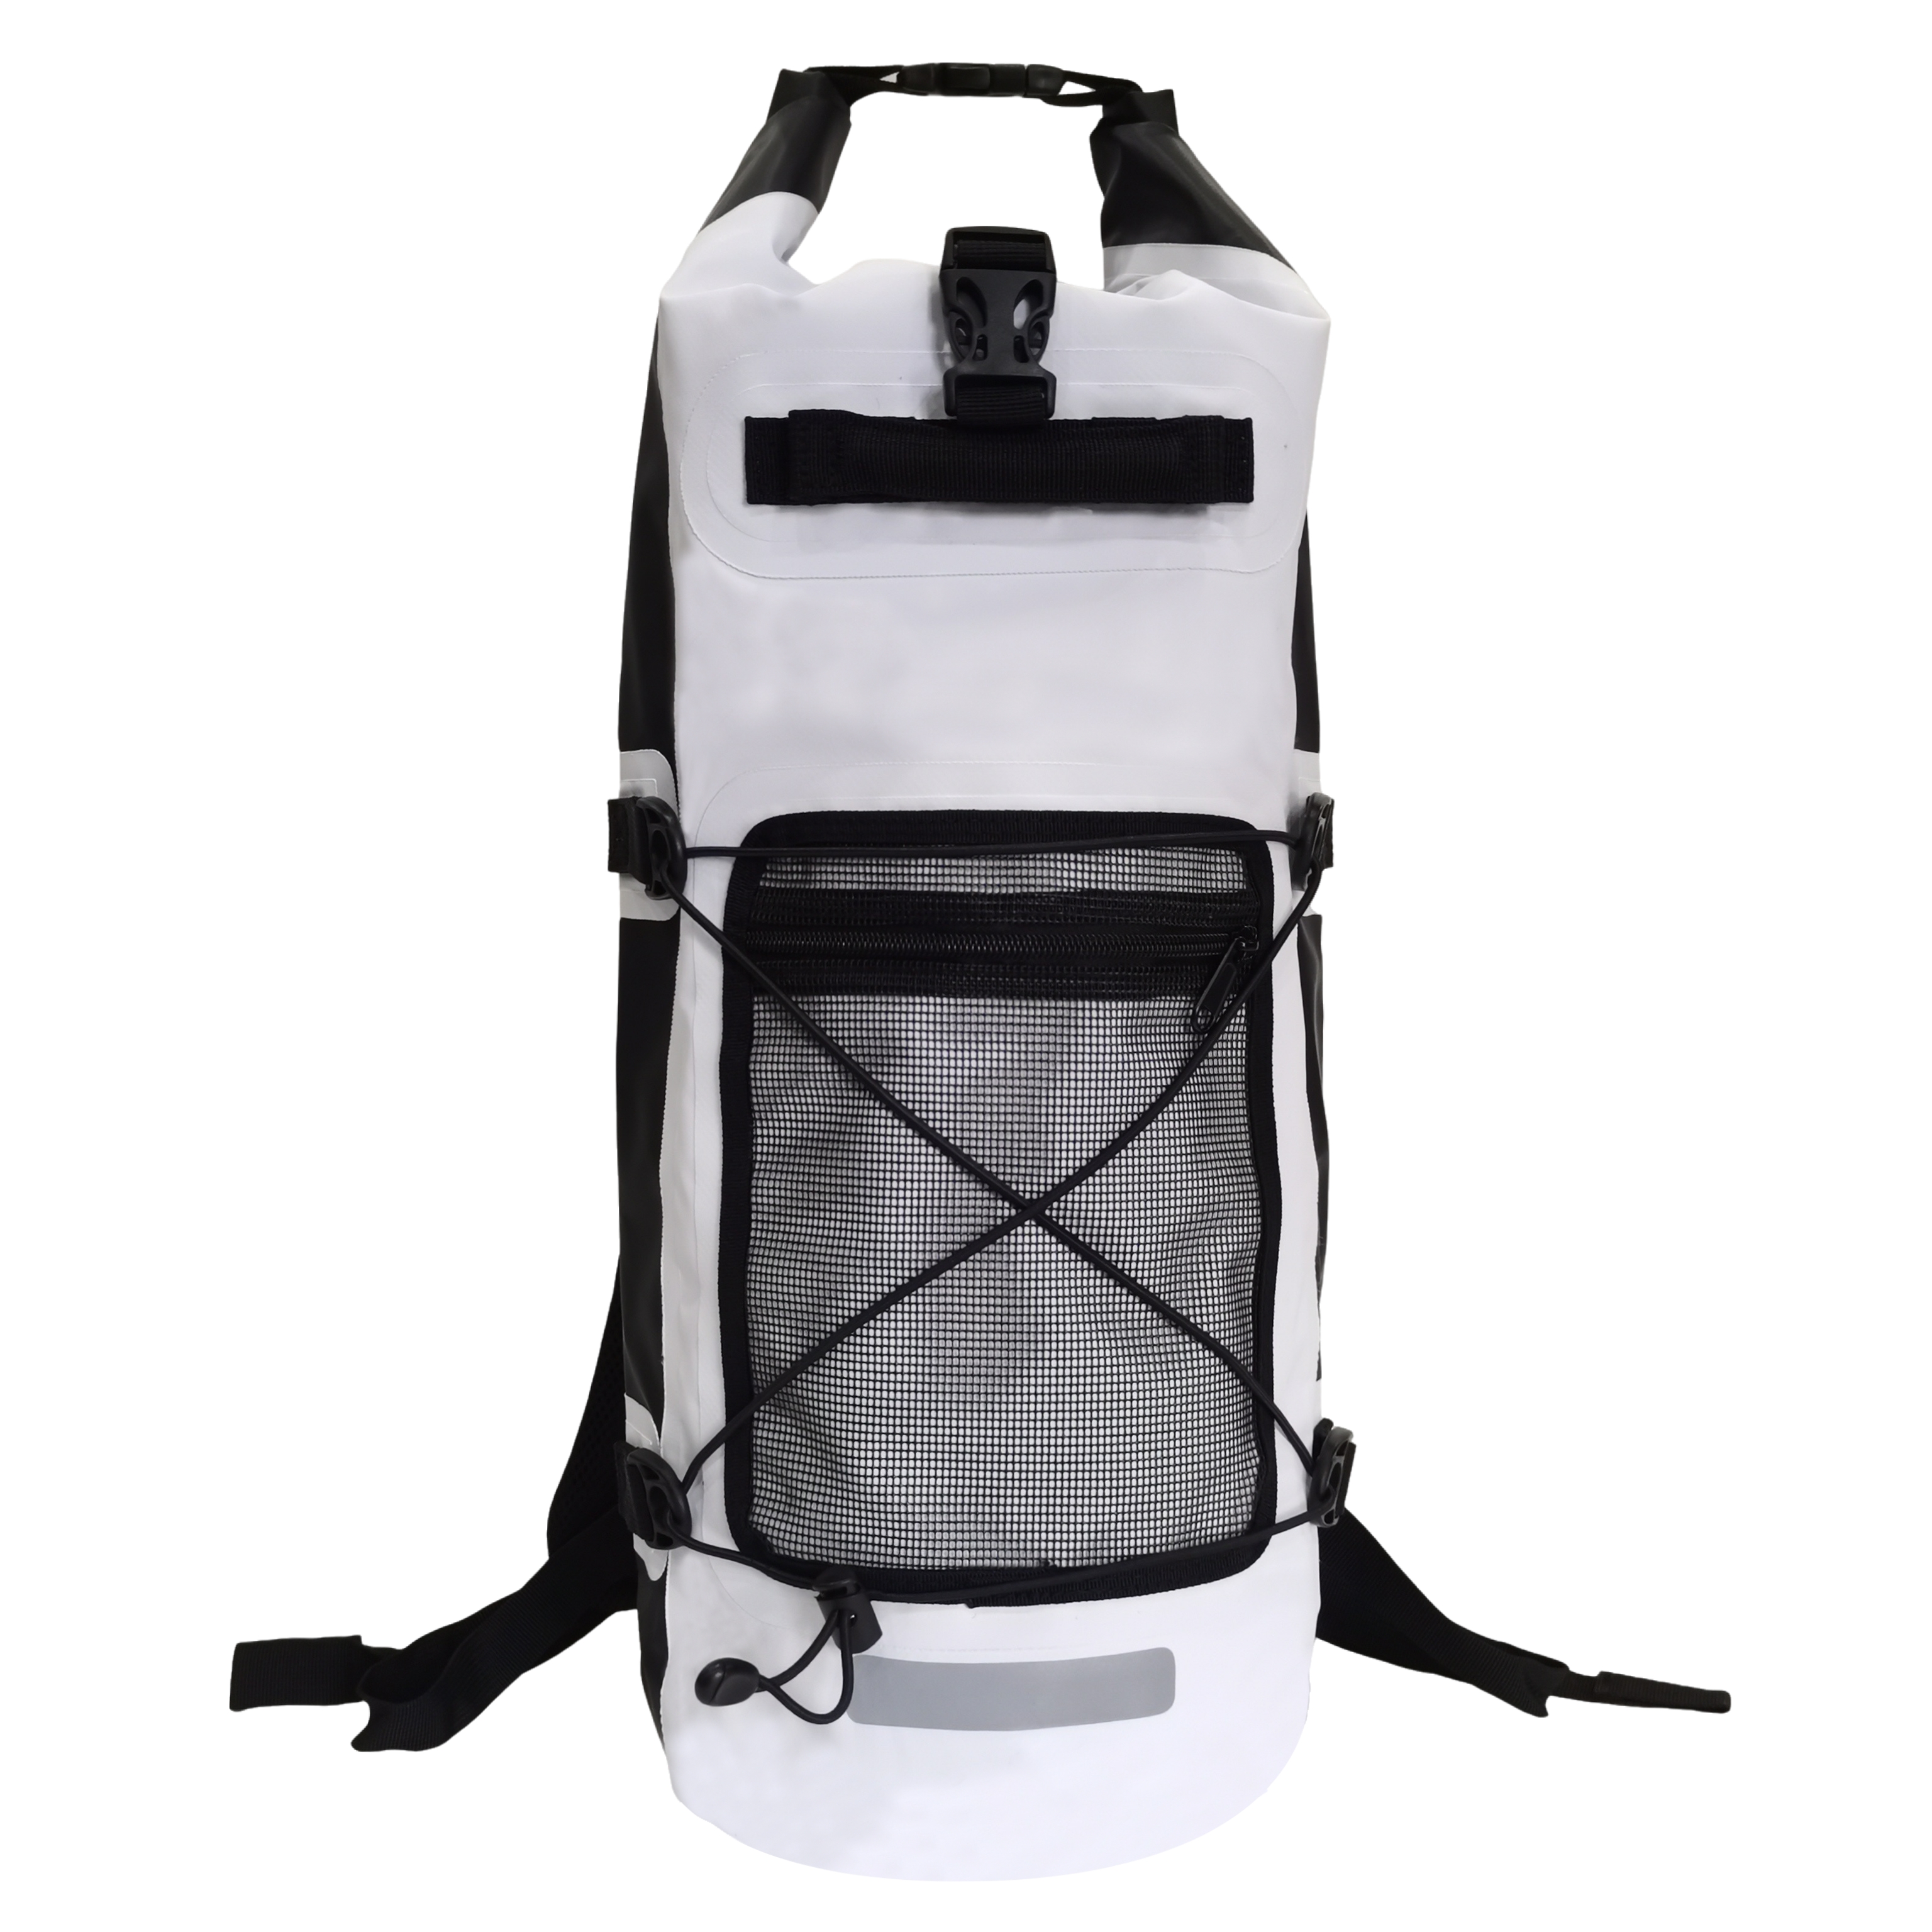 Mountain Land boating camping ocean pack dry bag backpack for outdoor hiking travel daily unisex